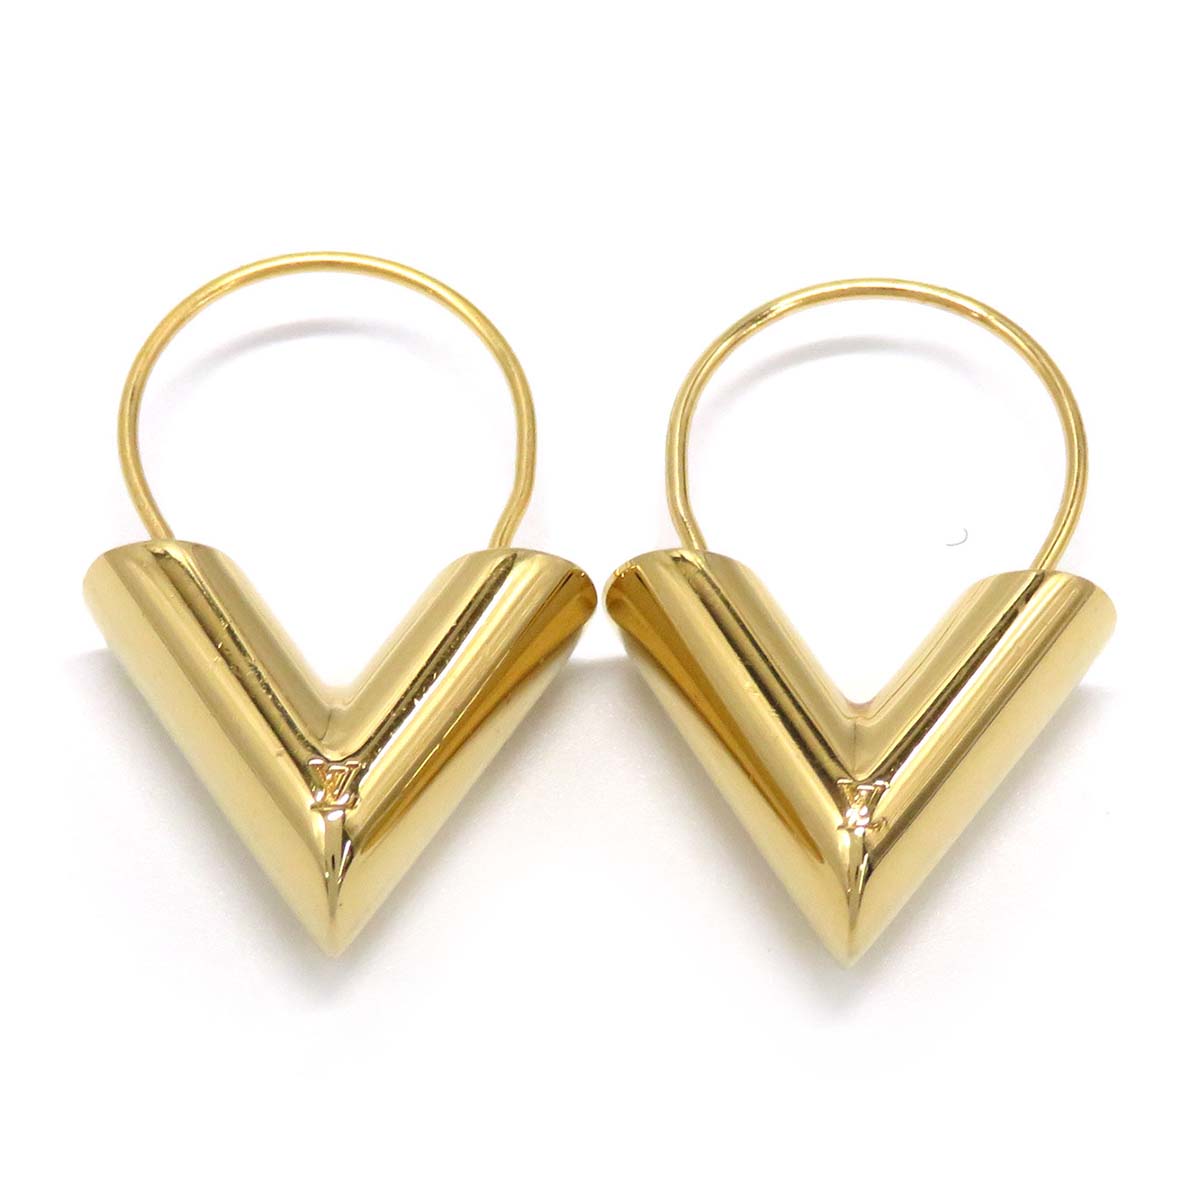 Products by Louis Vuitton: Essential V Stud Earrings  Louis vuitton  earrings, Louis vuitton jewelry, Stud earrings